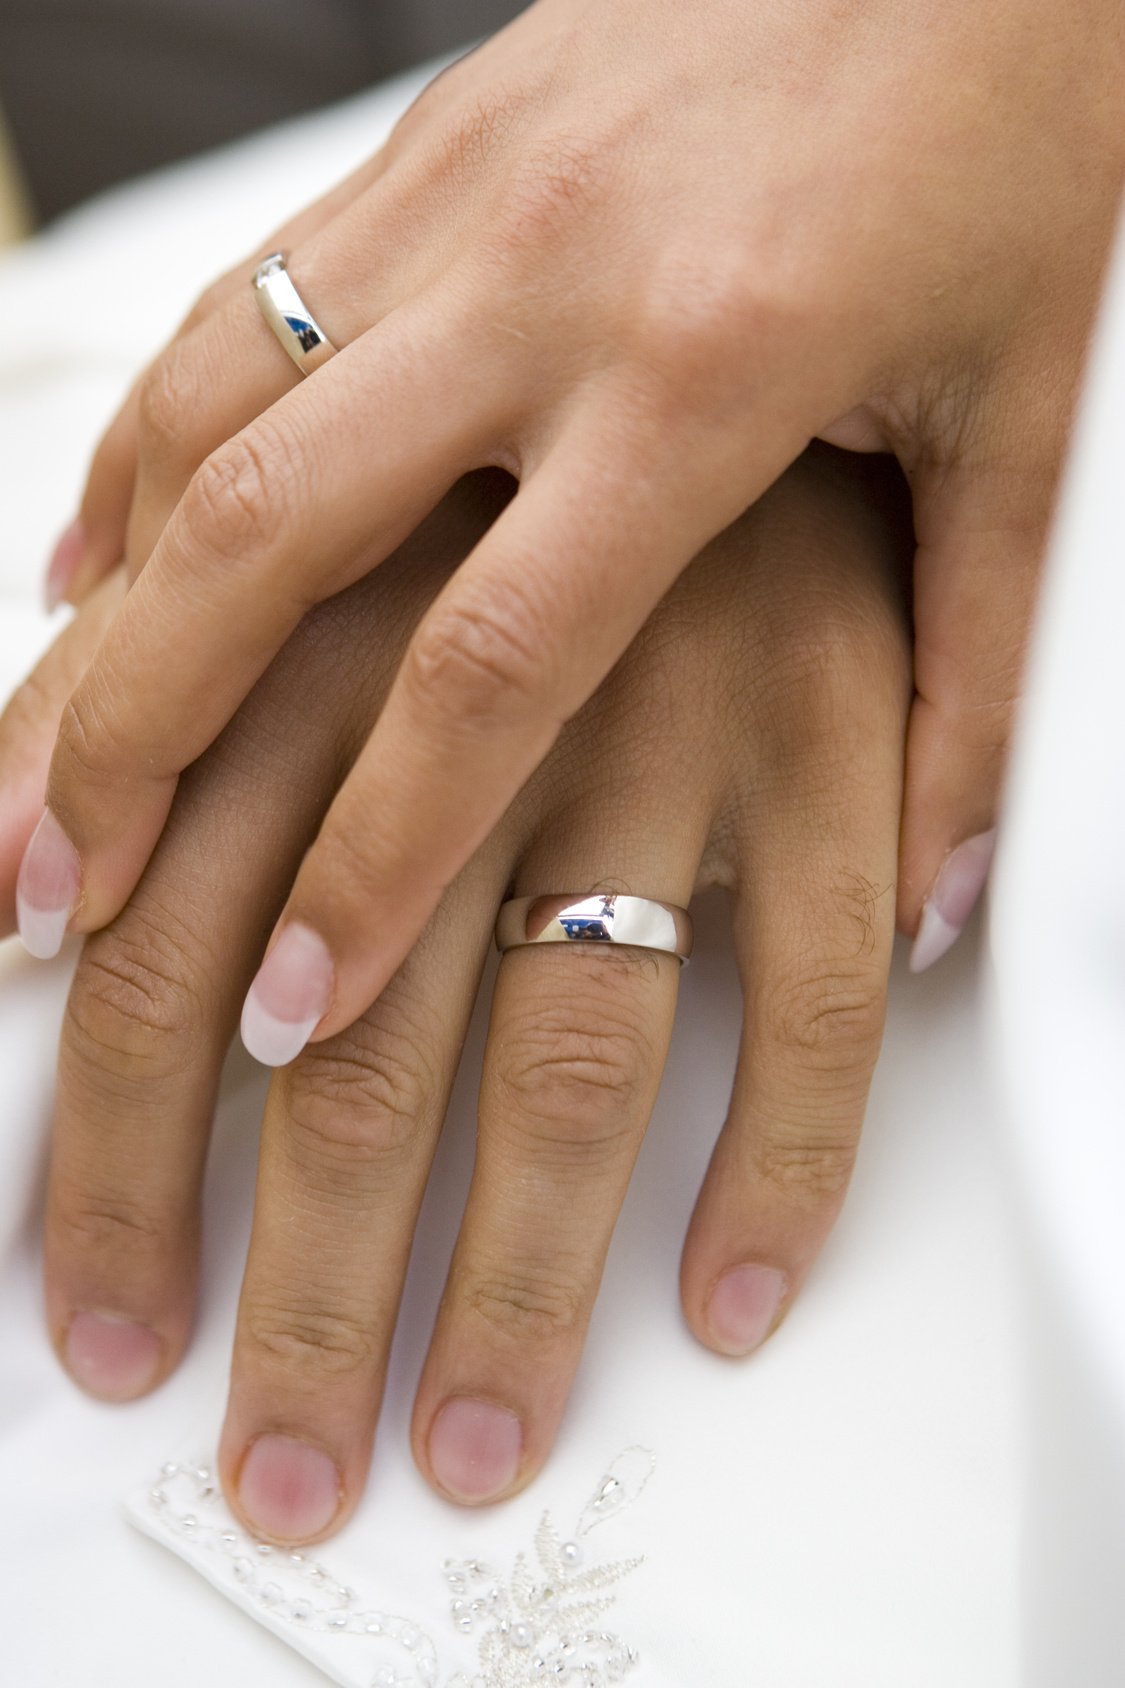 Wedding ring history and why it is worn on the left ring finger